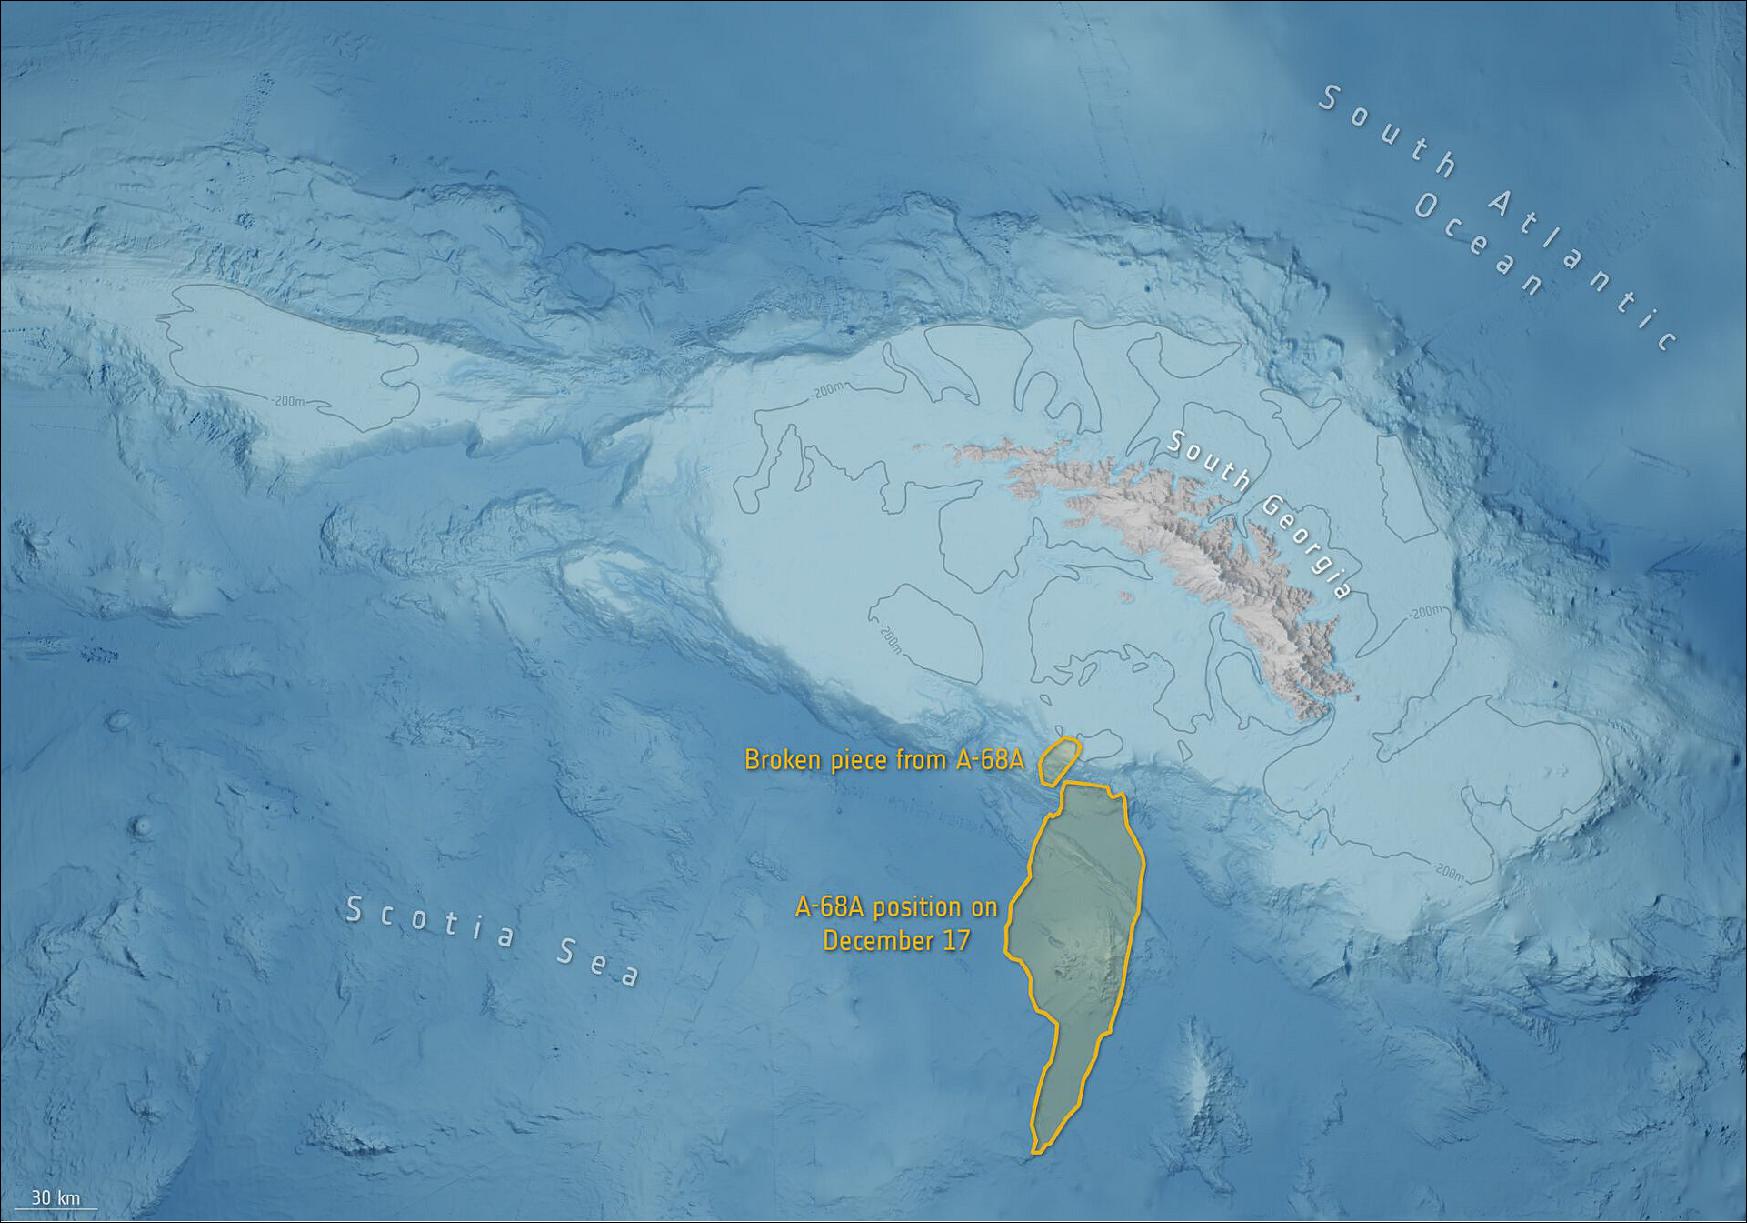 Figure 39: A-68A’s position on 17 December. New images have revealed that the A-68A iceberg has spun around in a clockwise direction, moving one end of the berg closer to the shelf and into shallow waters. In doing so, the berg could have scraped the seafloor, measuring less than 200 m deep, causing an enormous block of ice to snap off the iceberg’s upper tip (image credit: British Antarctic Survey/ESA)